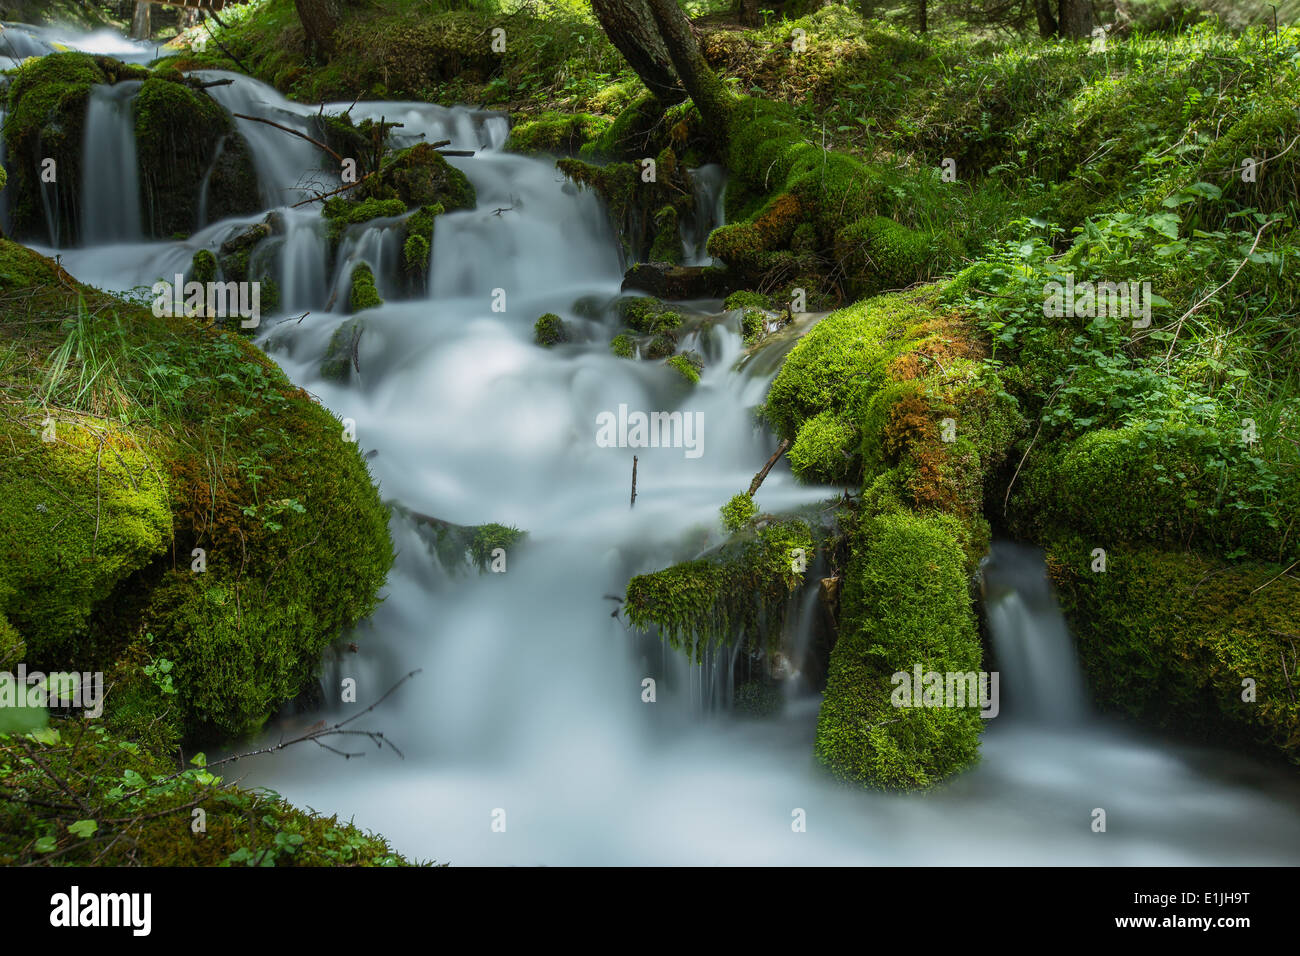 Alpine torrent and green mosses in the Canali valley. The Dolomites of Trentino. Italian Alps. Long exposure, water silk effect. Stock Photo